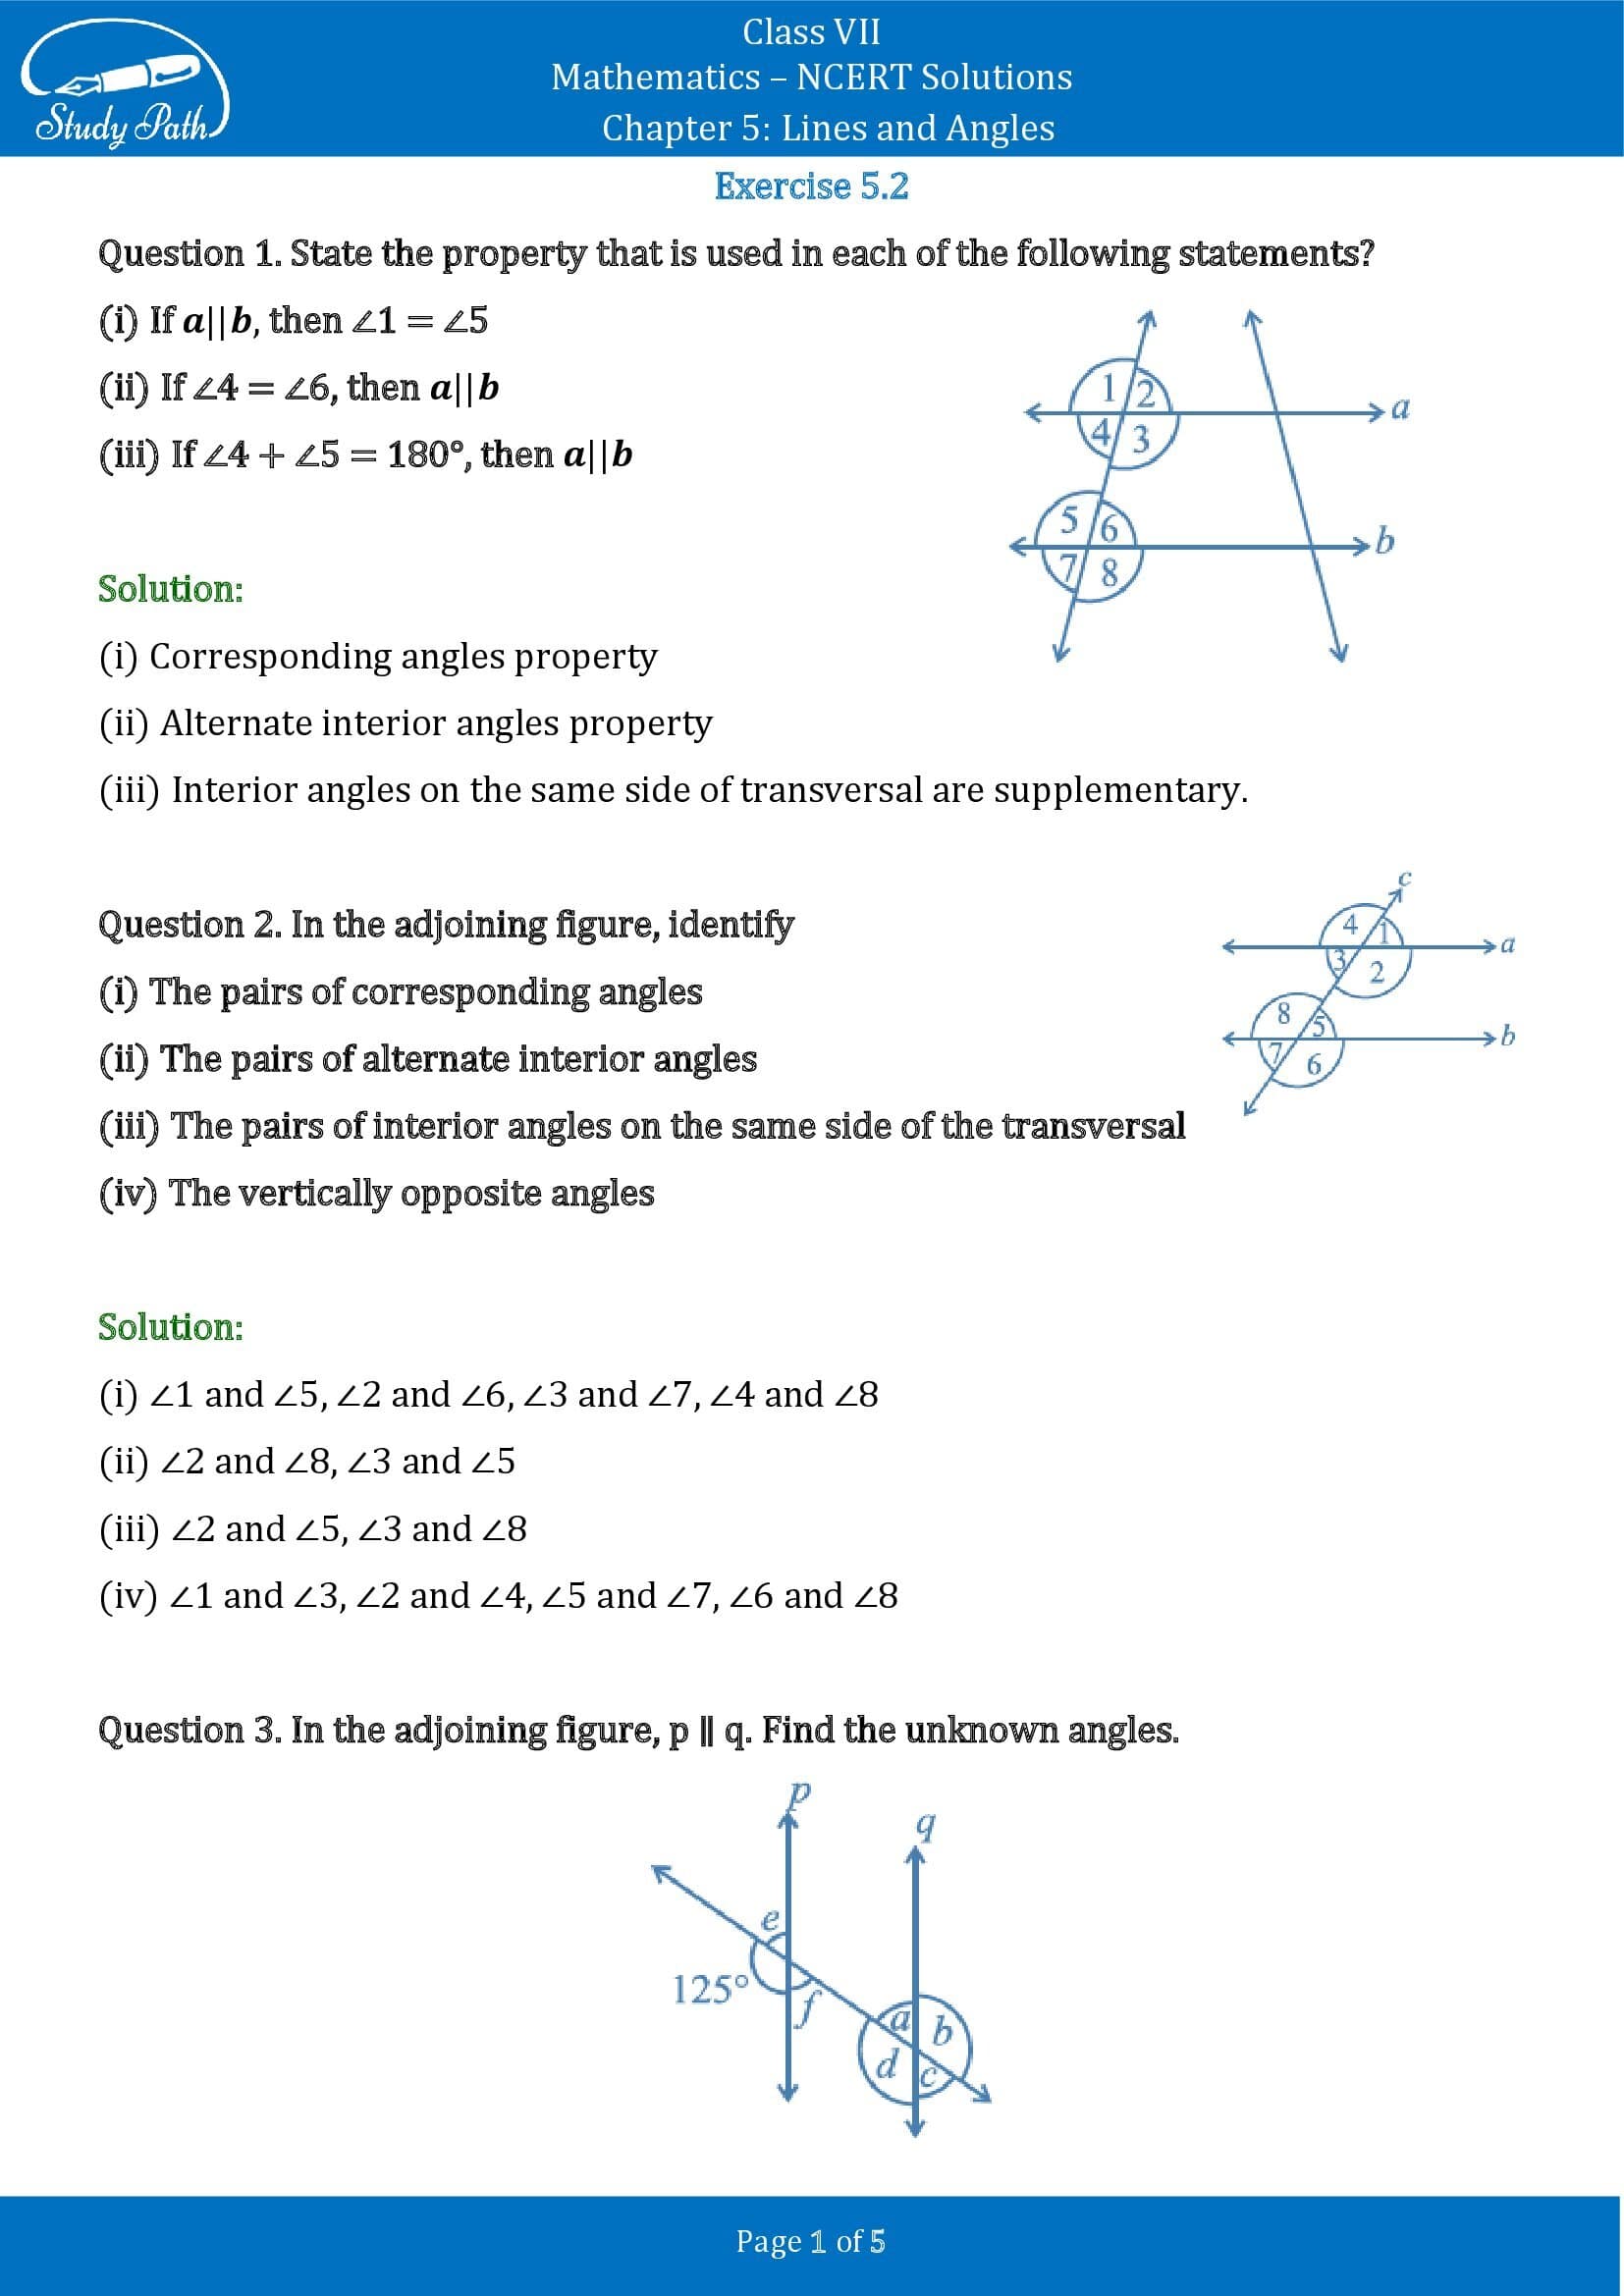 NCERT Solutions for Class 7 Maths Chapter 5 Lines and Angles Exercise 5.2 00001